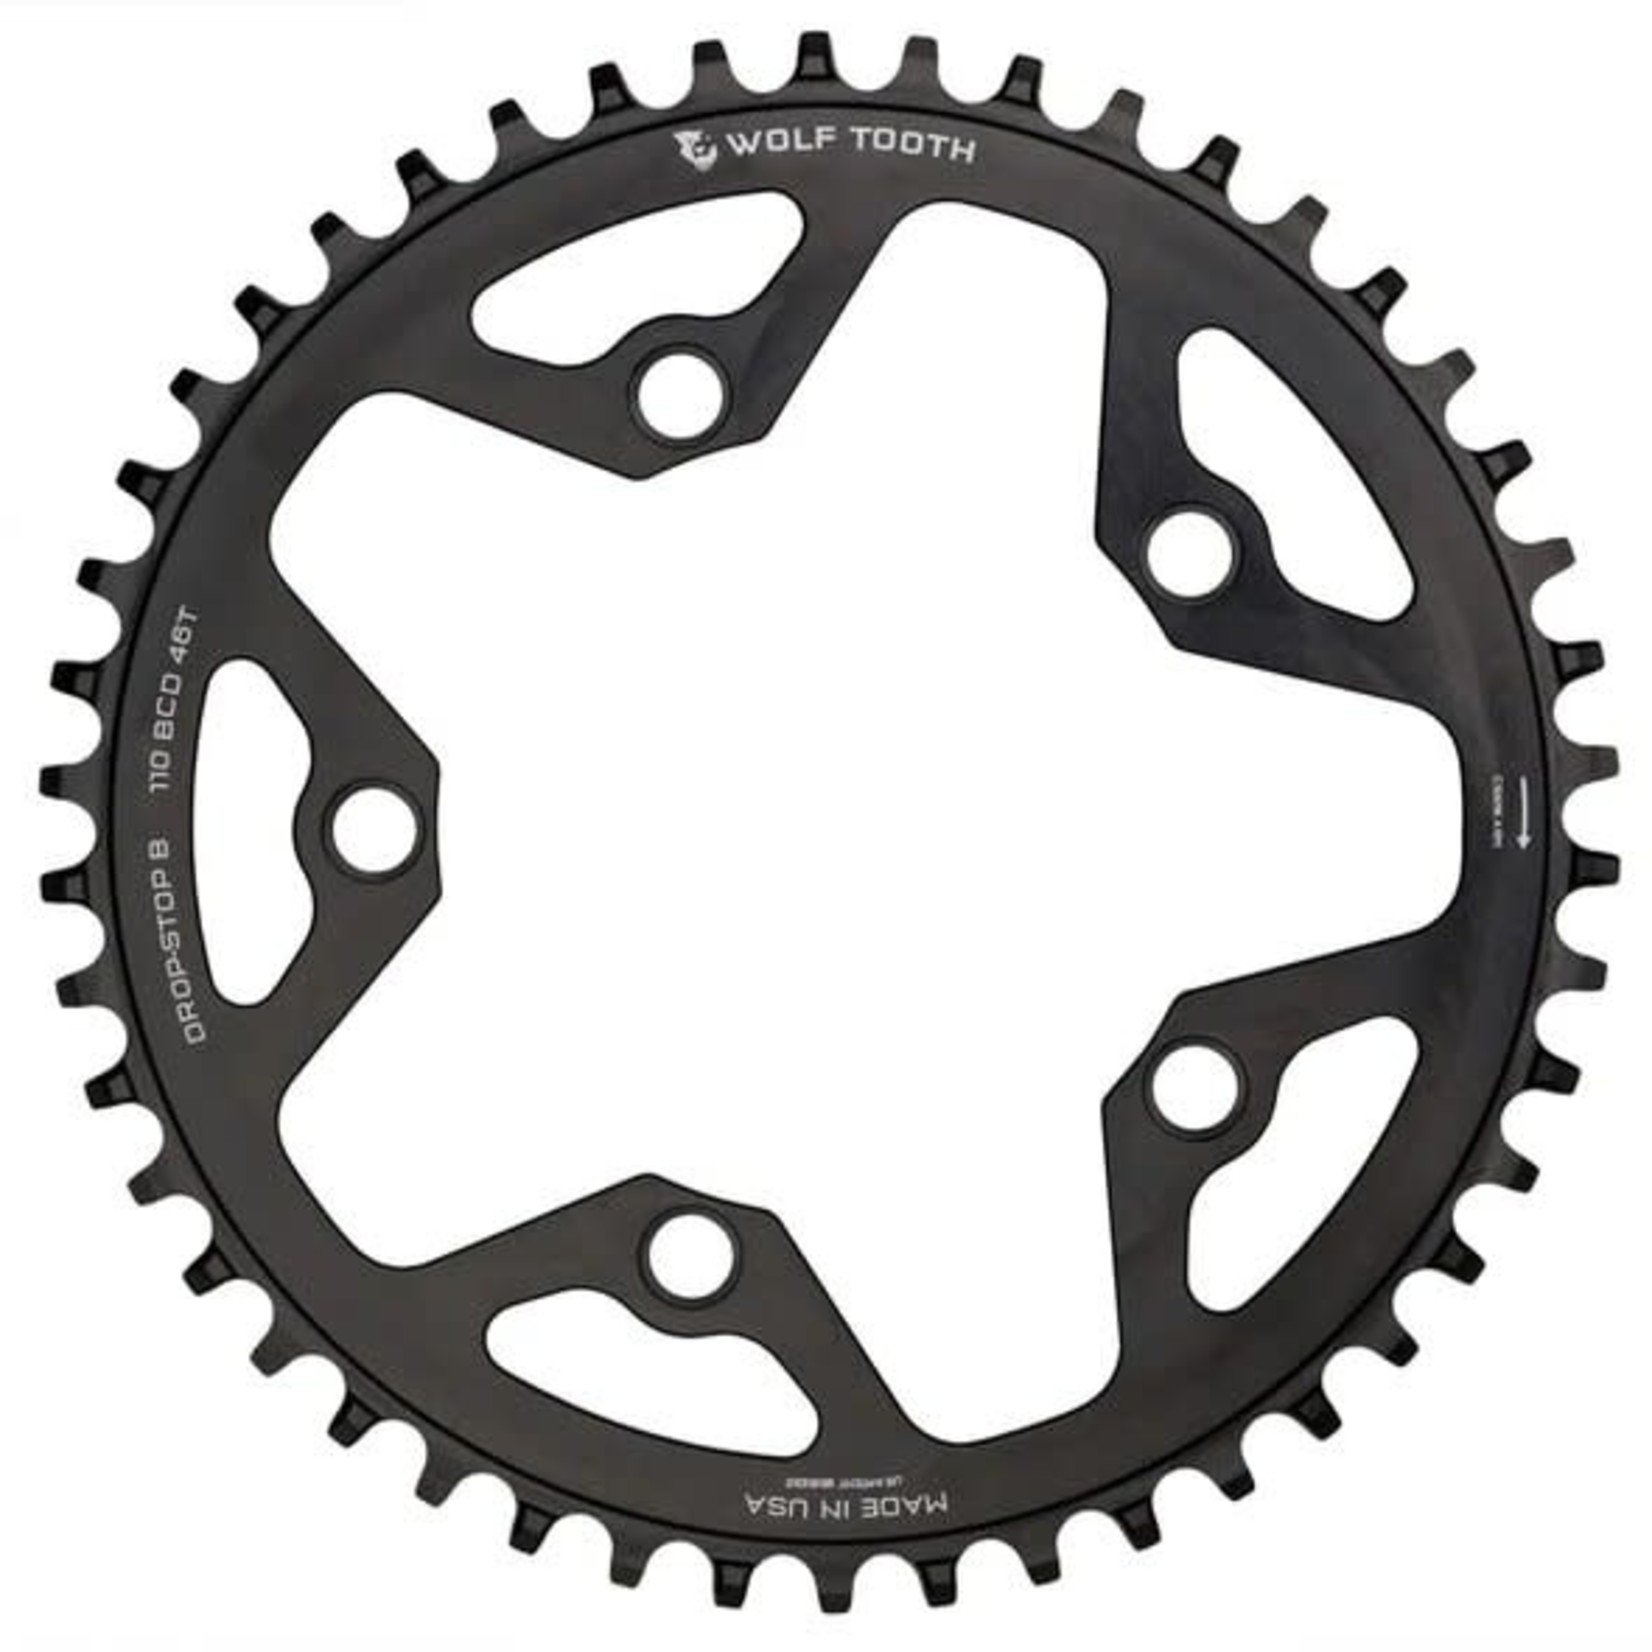 Wolf Tooth Components Wolf Tooth 110 BCD 5 Bolt Chainring 46T compatible with SRAM Flattop